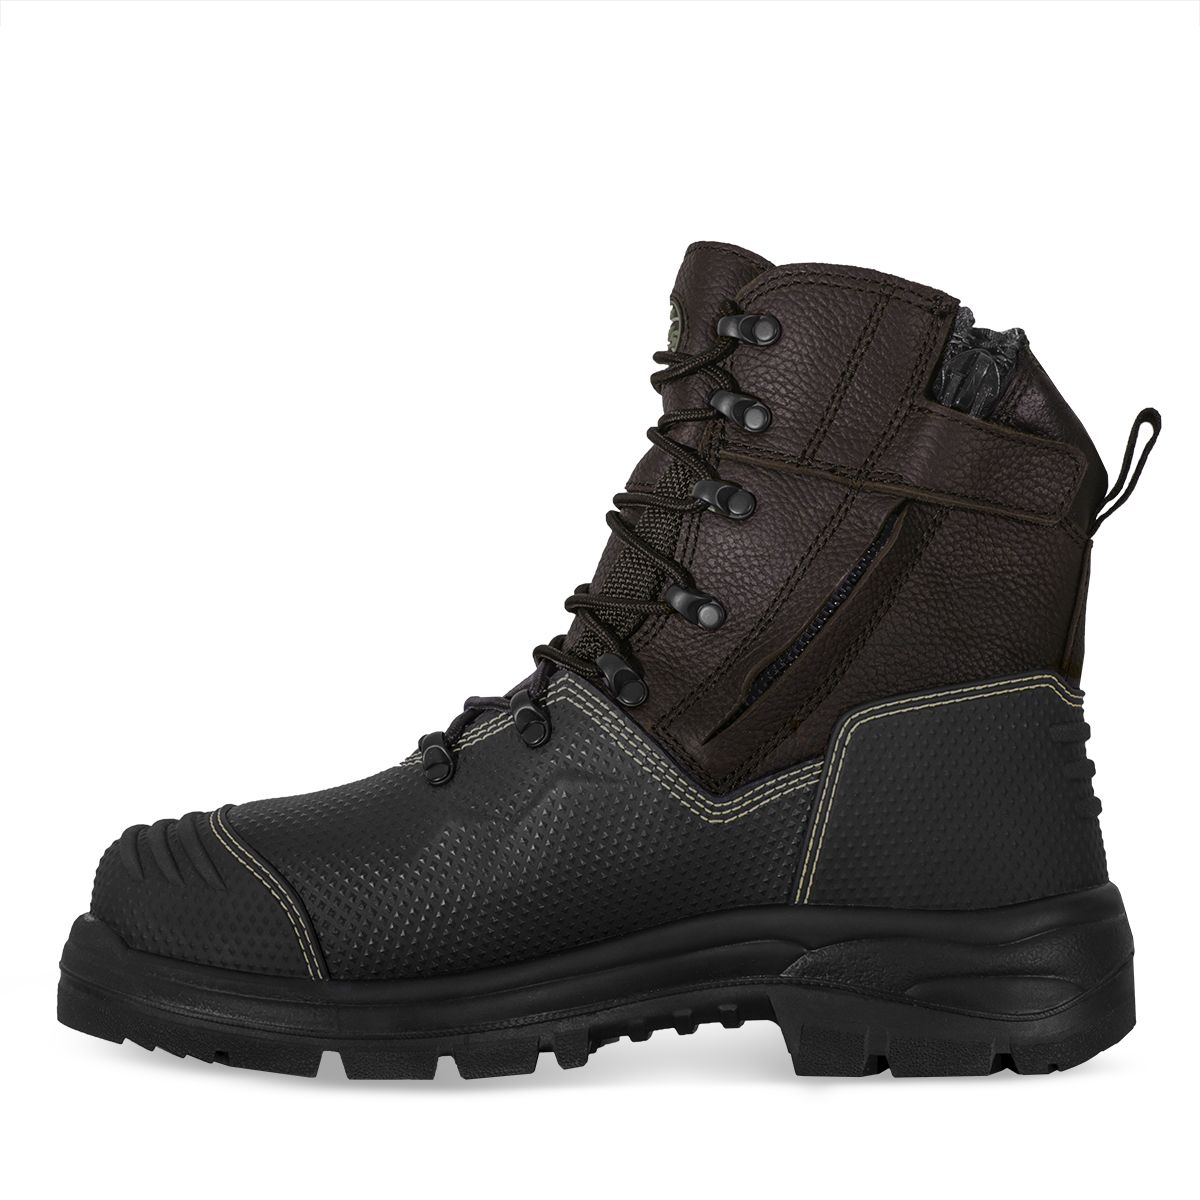 SAFETY BOOT LACE UP BROWN  ZIP AT65 CHEMICAL S10 (EH) PROTECTION